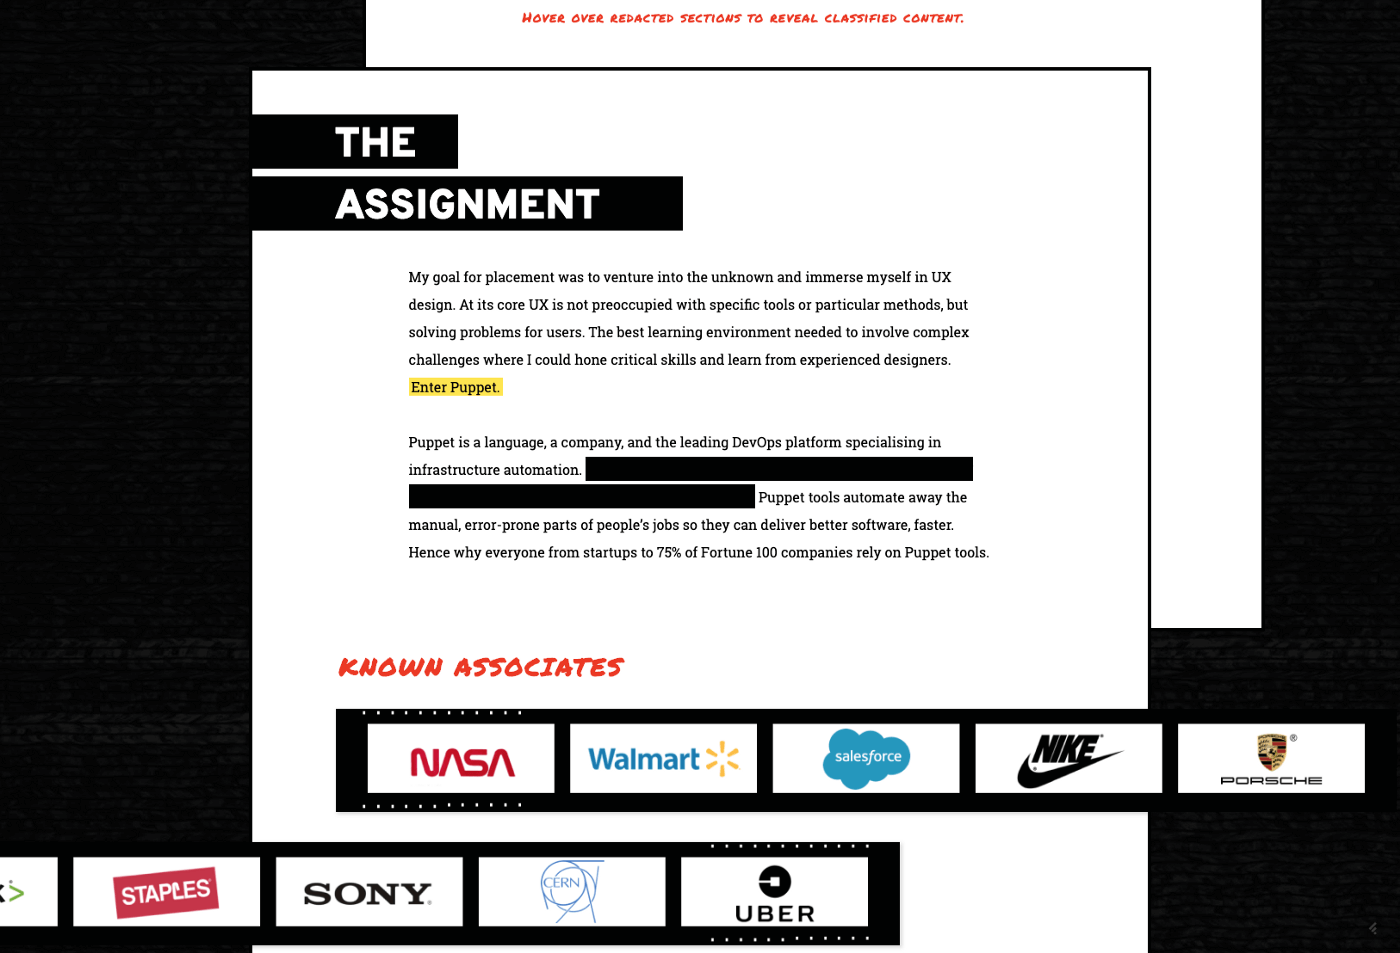 A web essay styled as declassified document for redacted segments.